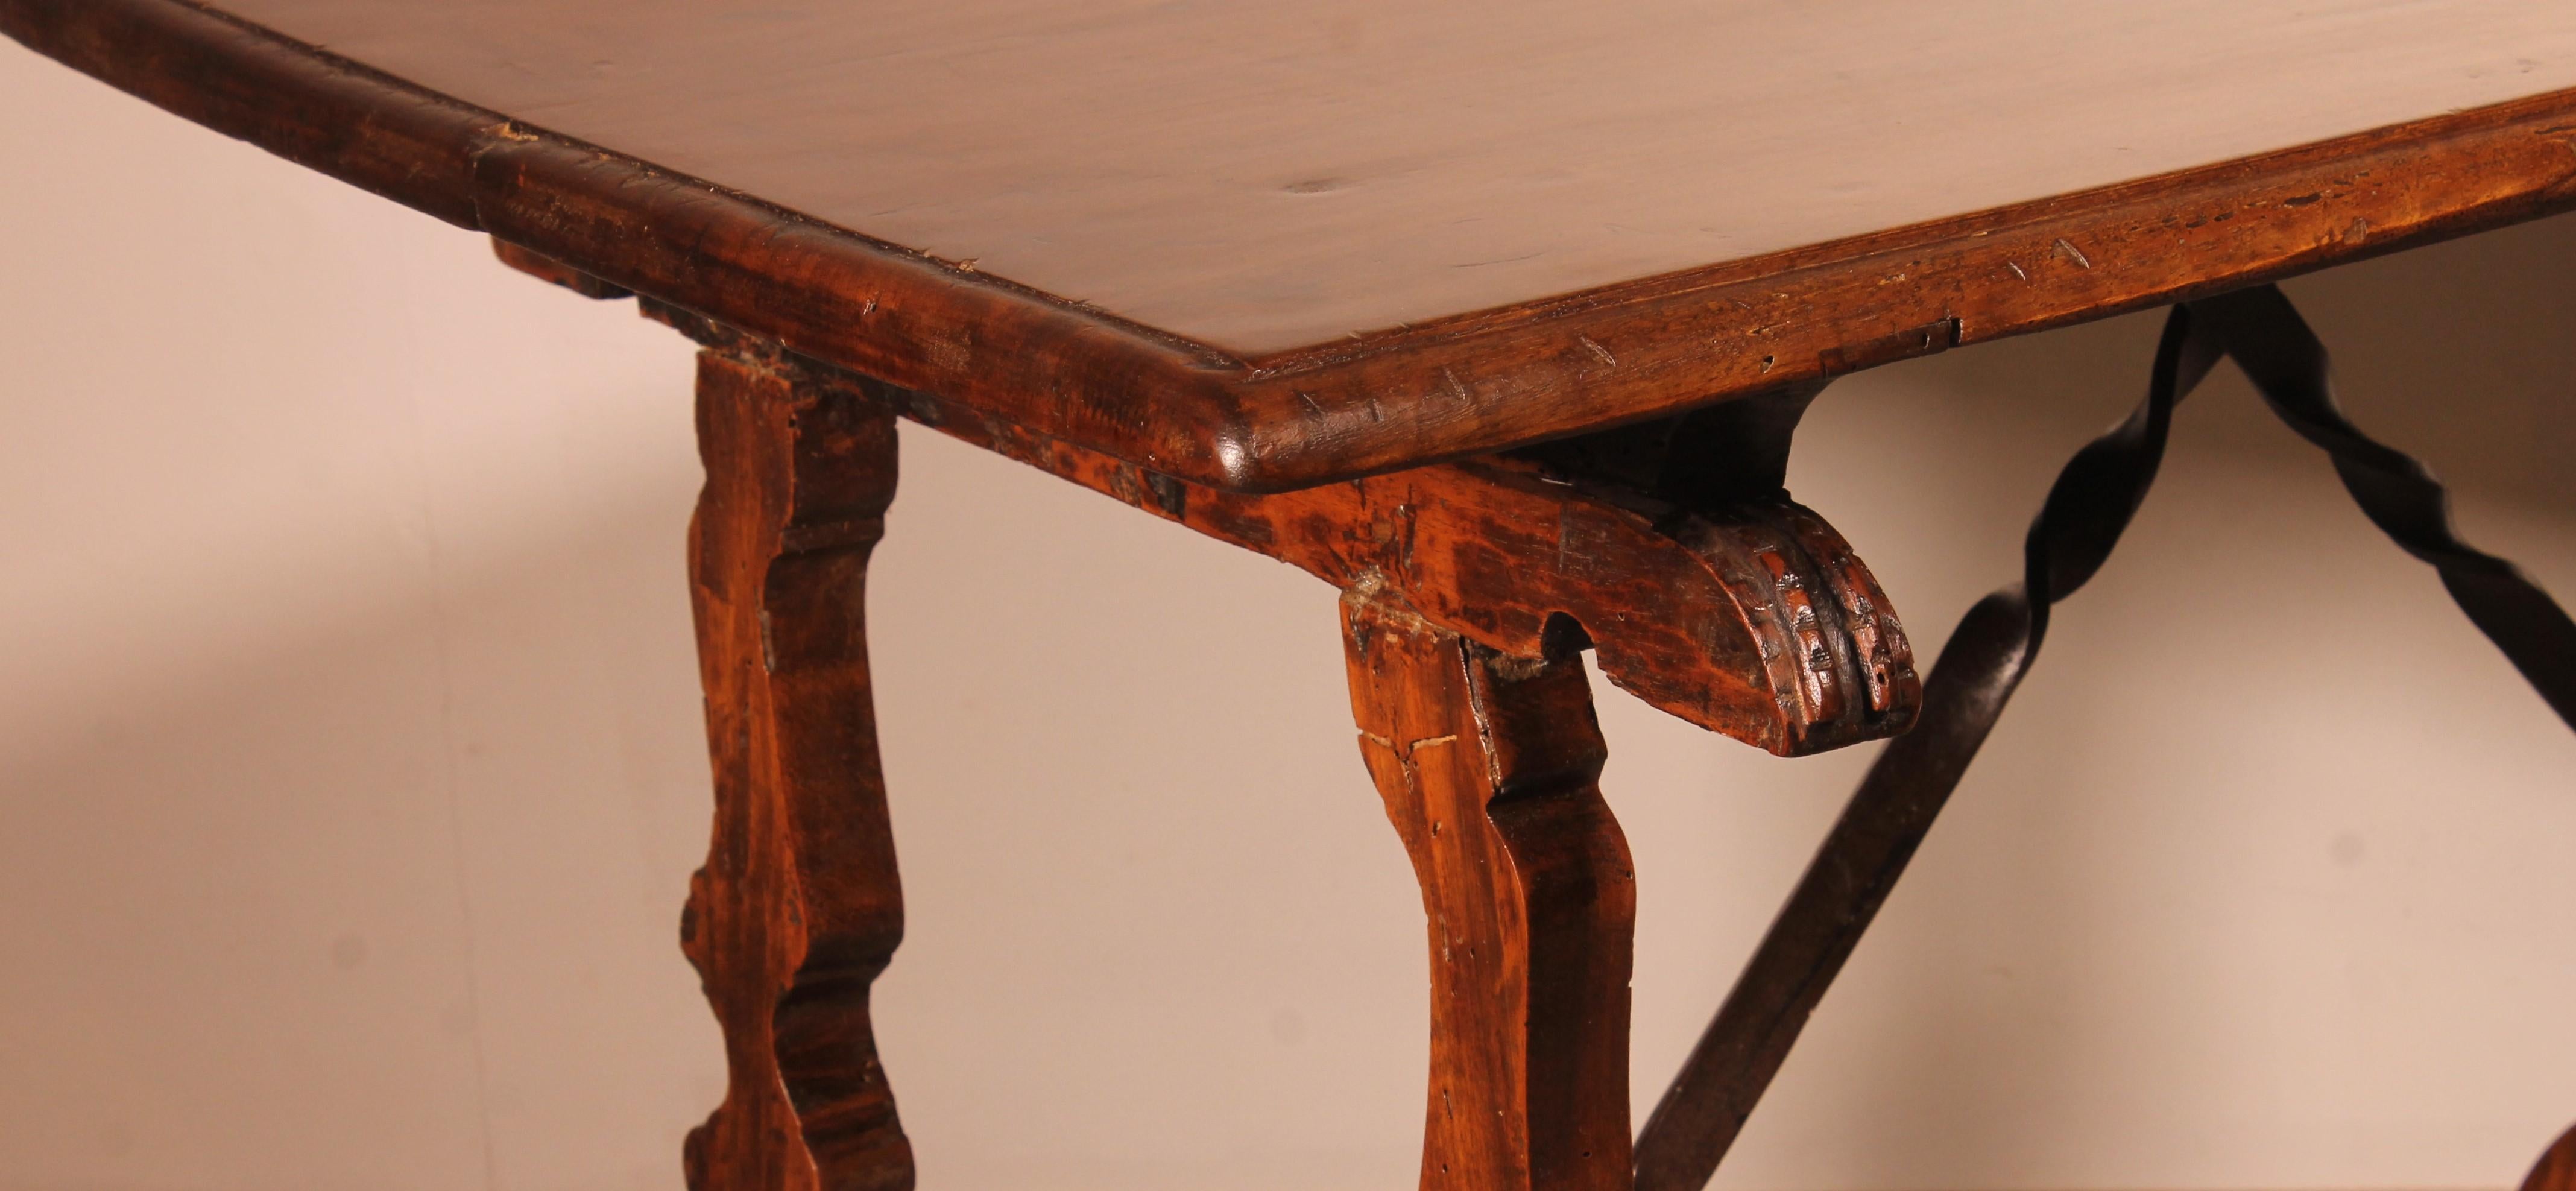 18th Century and Earlier Spanish Renaissance Table In Walnut-17th Century